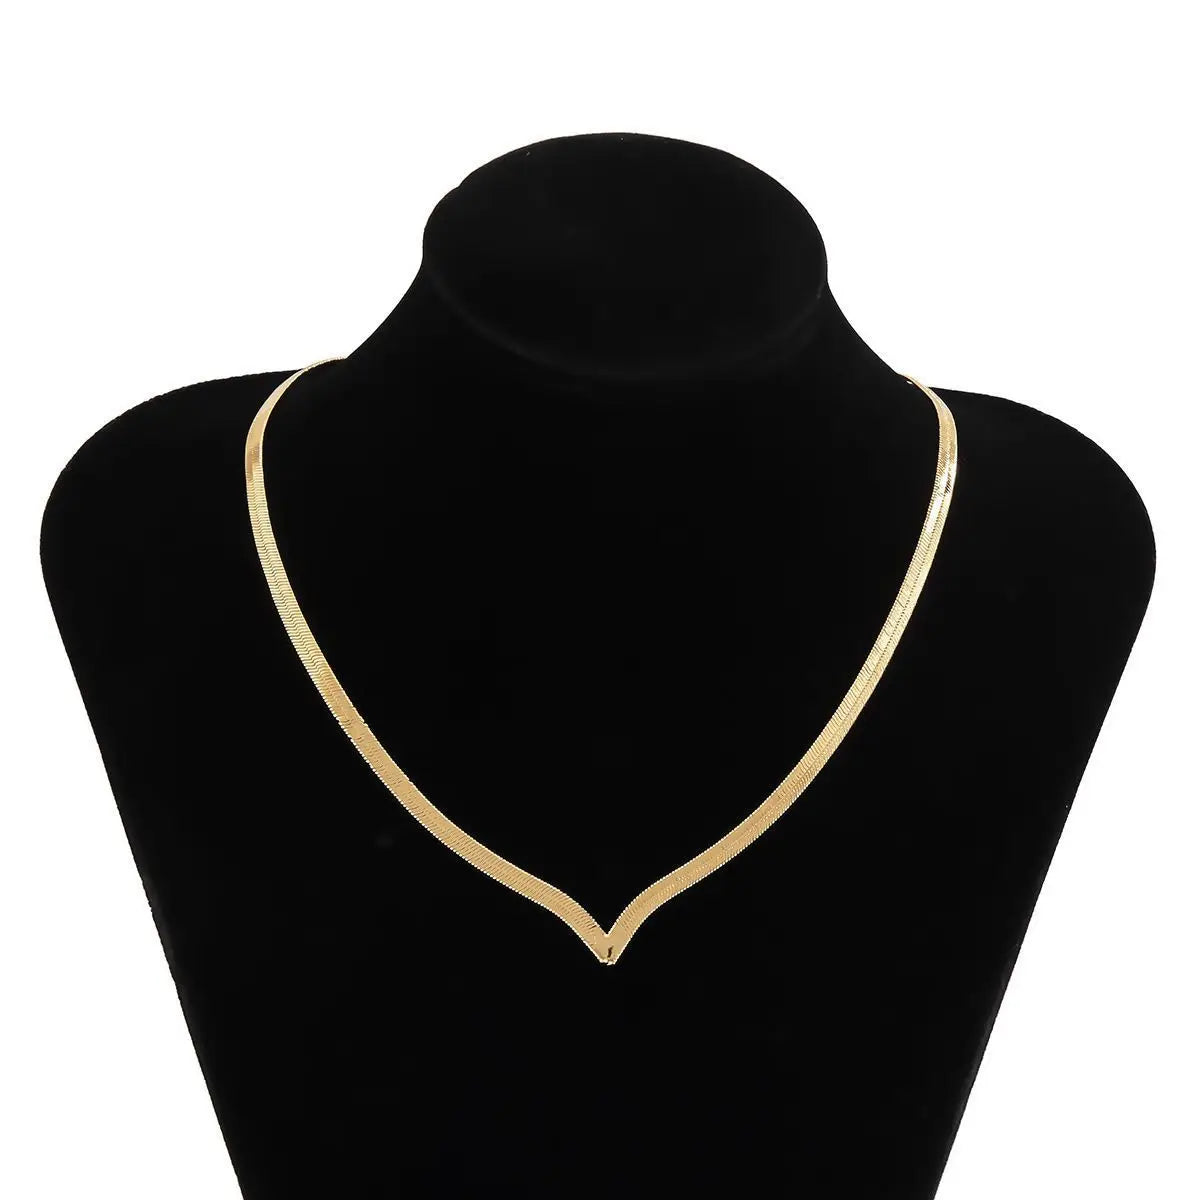 Simple Creative V-shaped Necklace For Women Flat Snake Chain Choker Fashion Blade Chains Neck Accessories Jewelry Gift